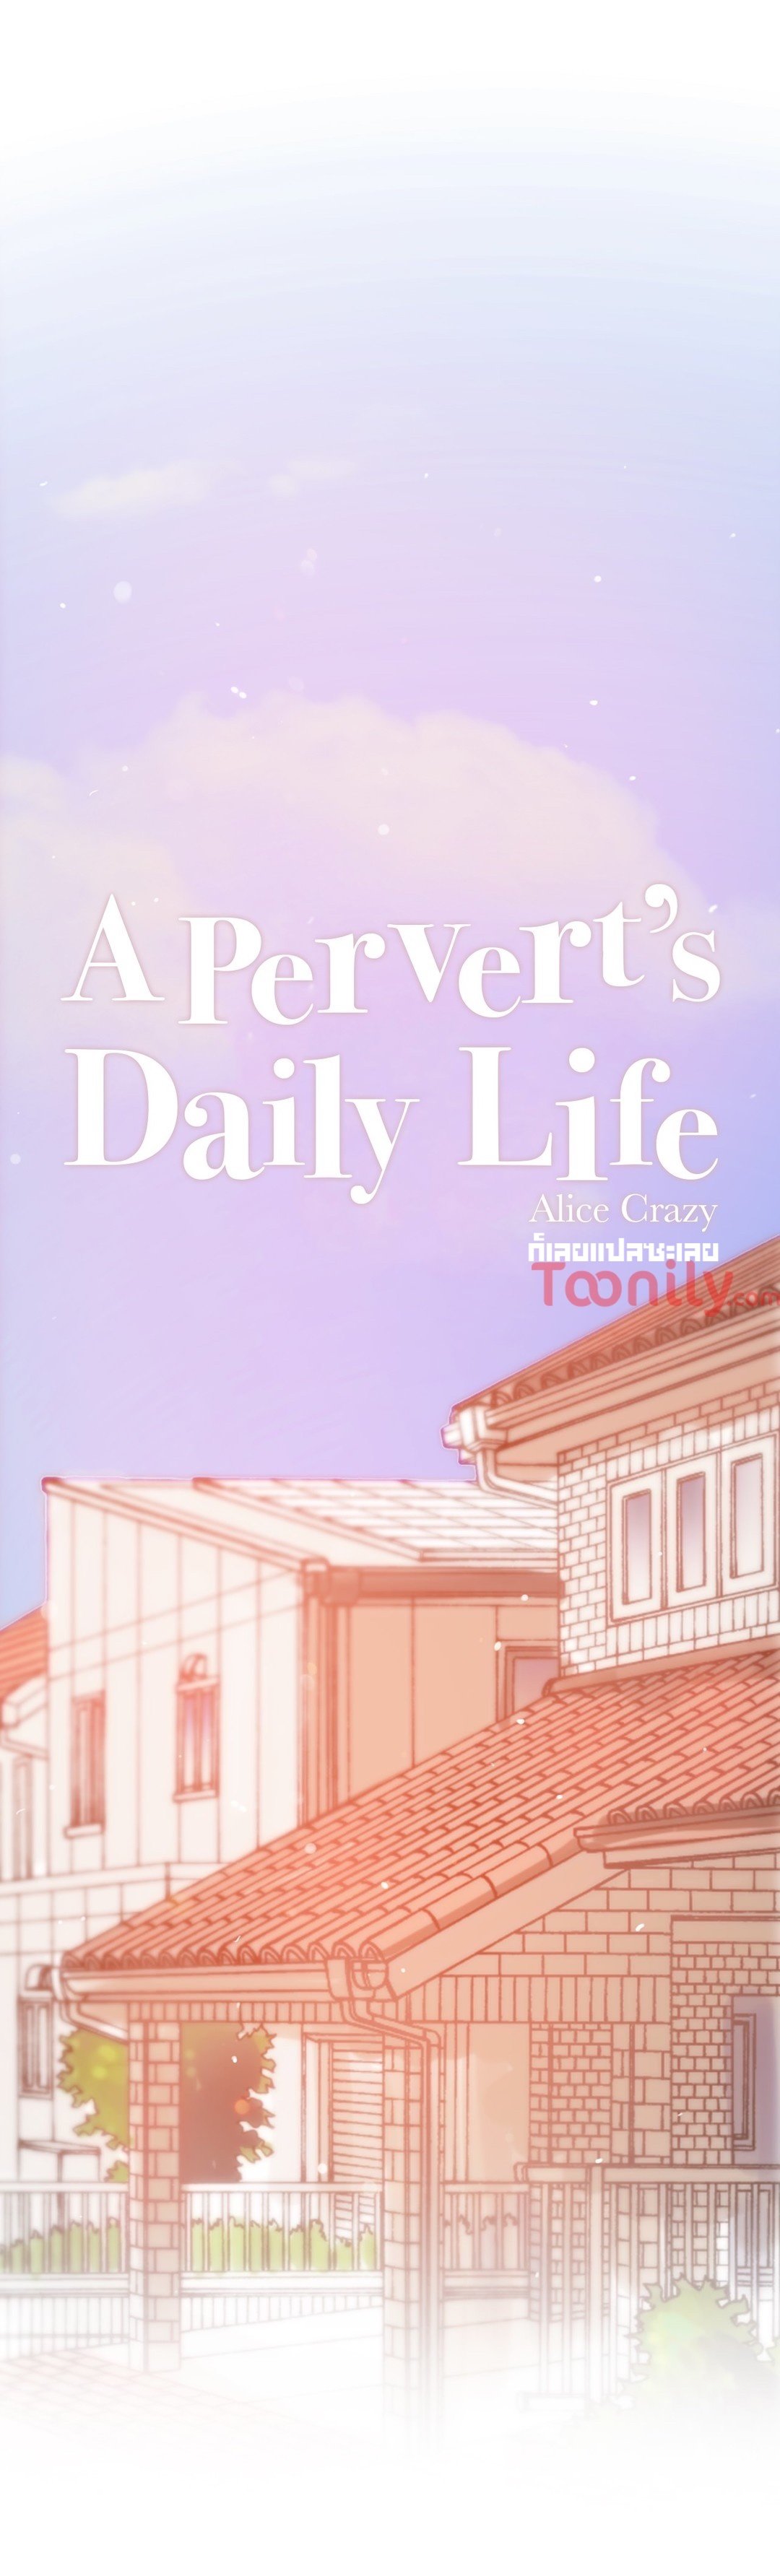 A Pervert’s Daily Life 65 03